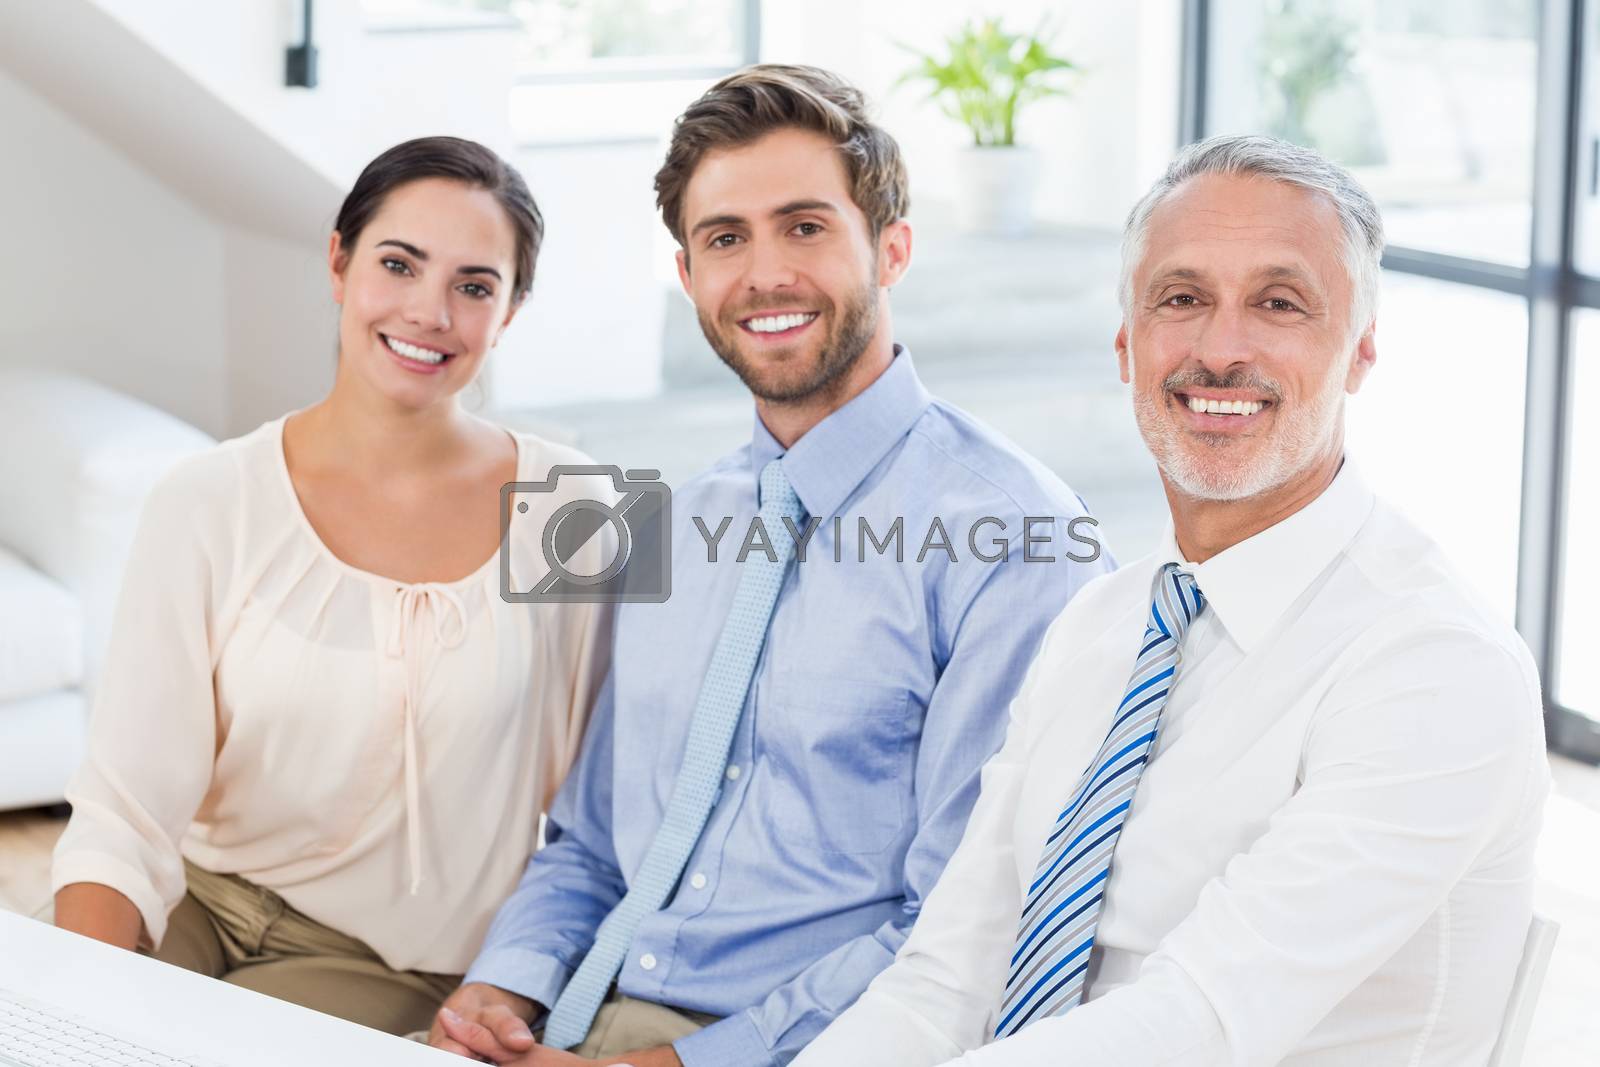 Royalty free image of Portrait of business colleagues sitting at desk by Wavebreakmedia